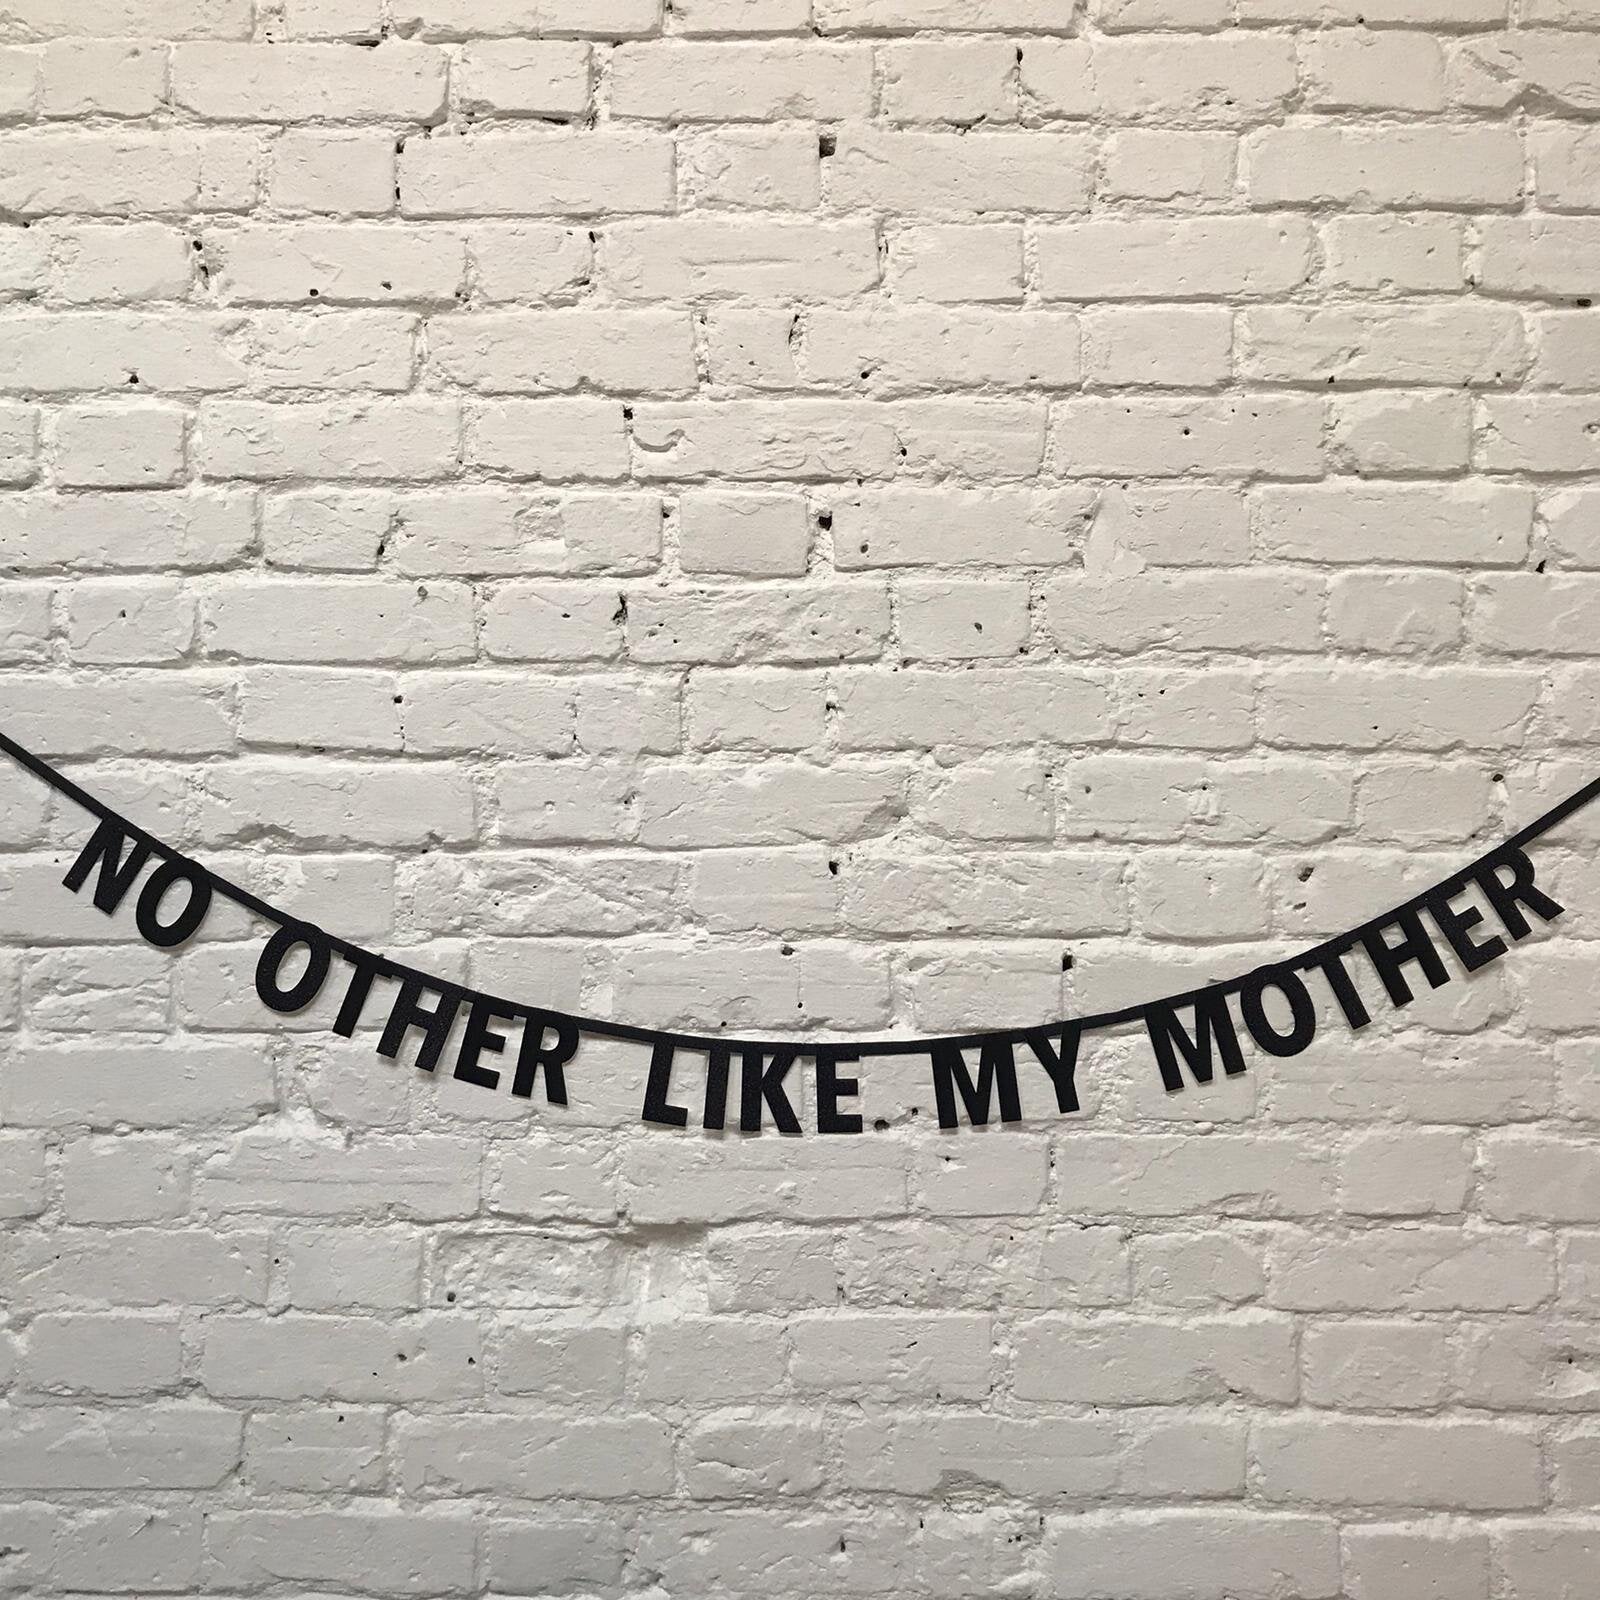 'NO OTHER LIKE MY MOTHER' BANNER